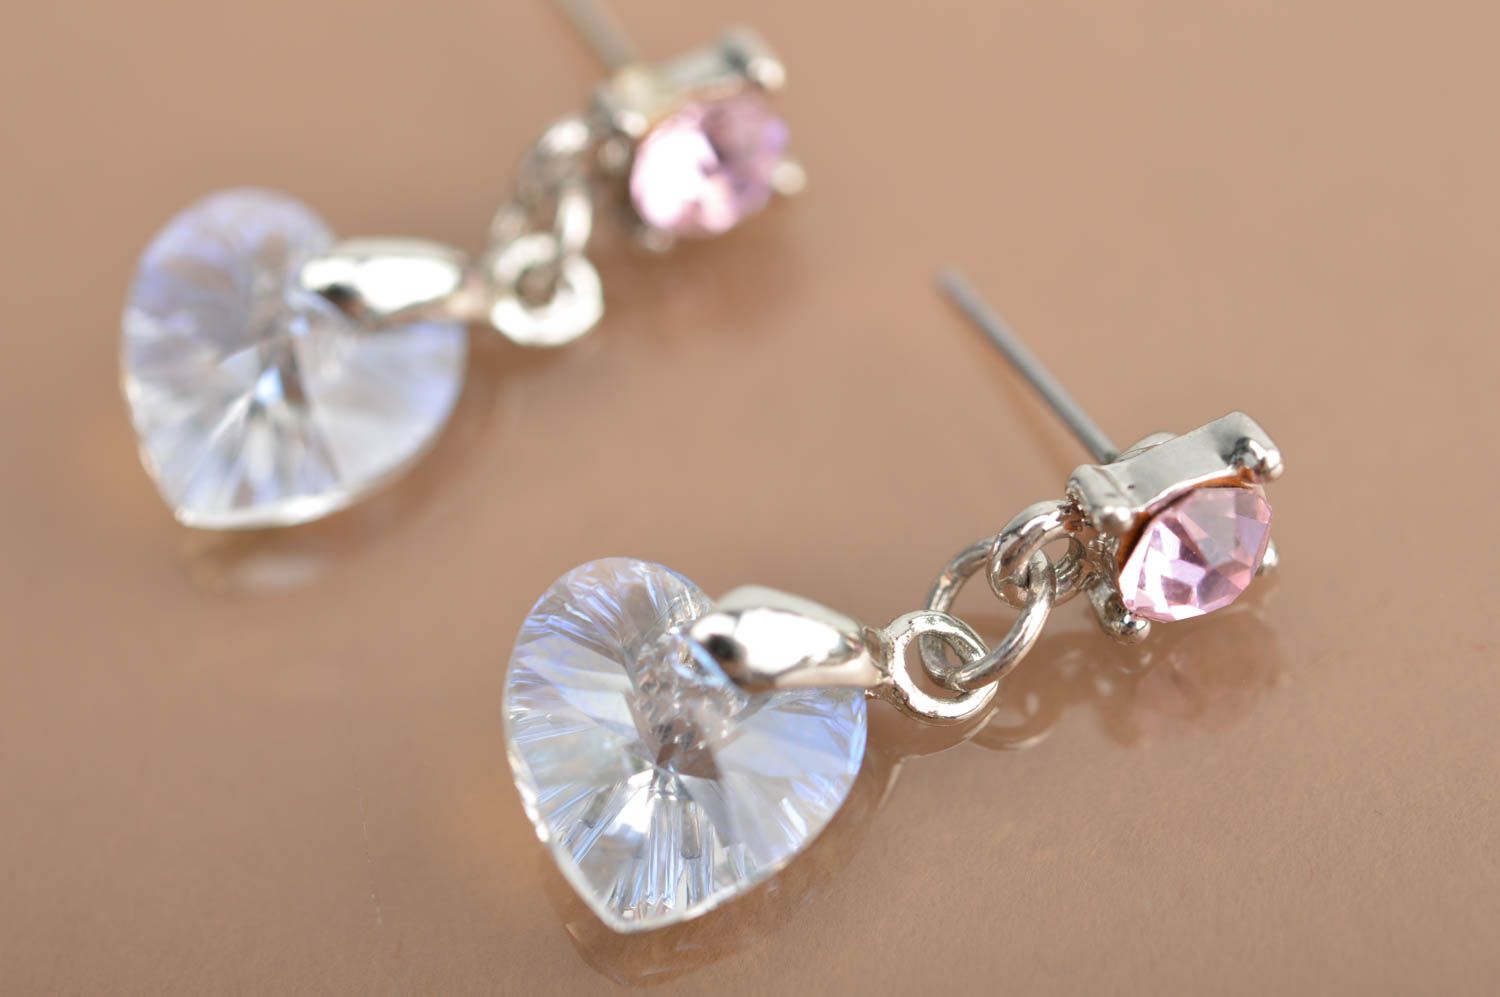 Designer beautiful handmade earrings with Austrian crystals and charms photo 2